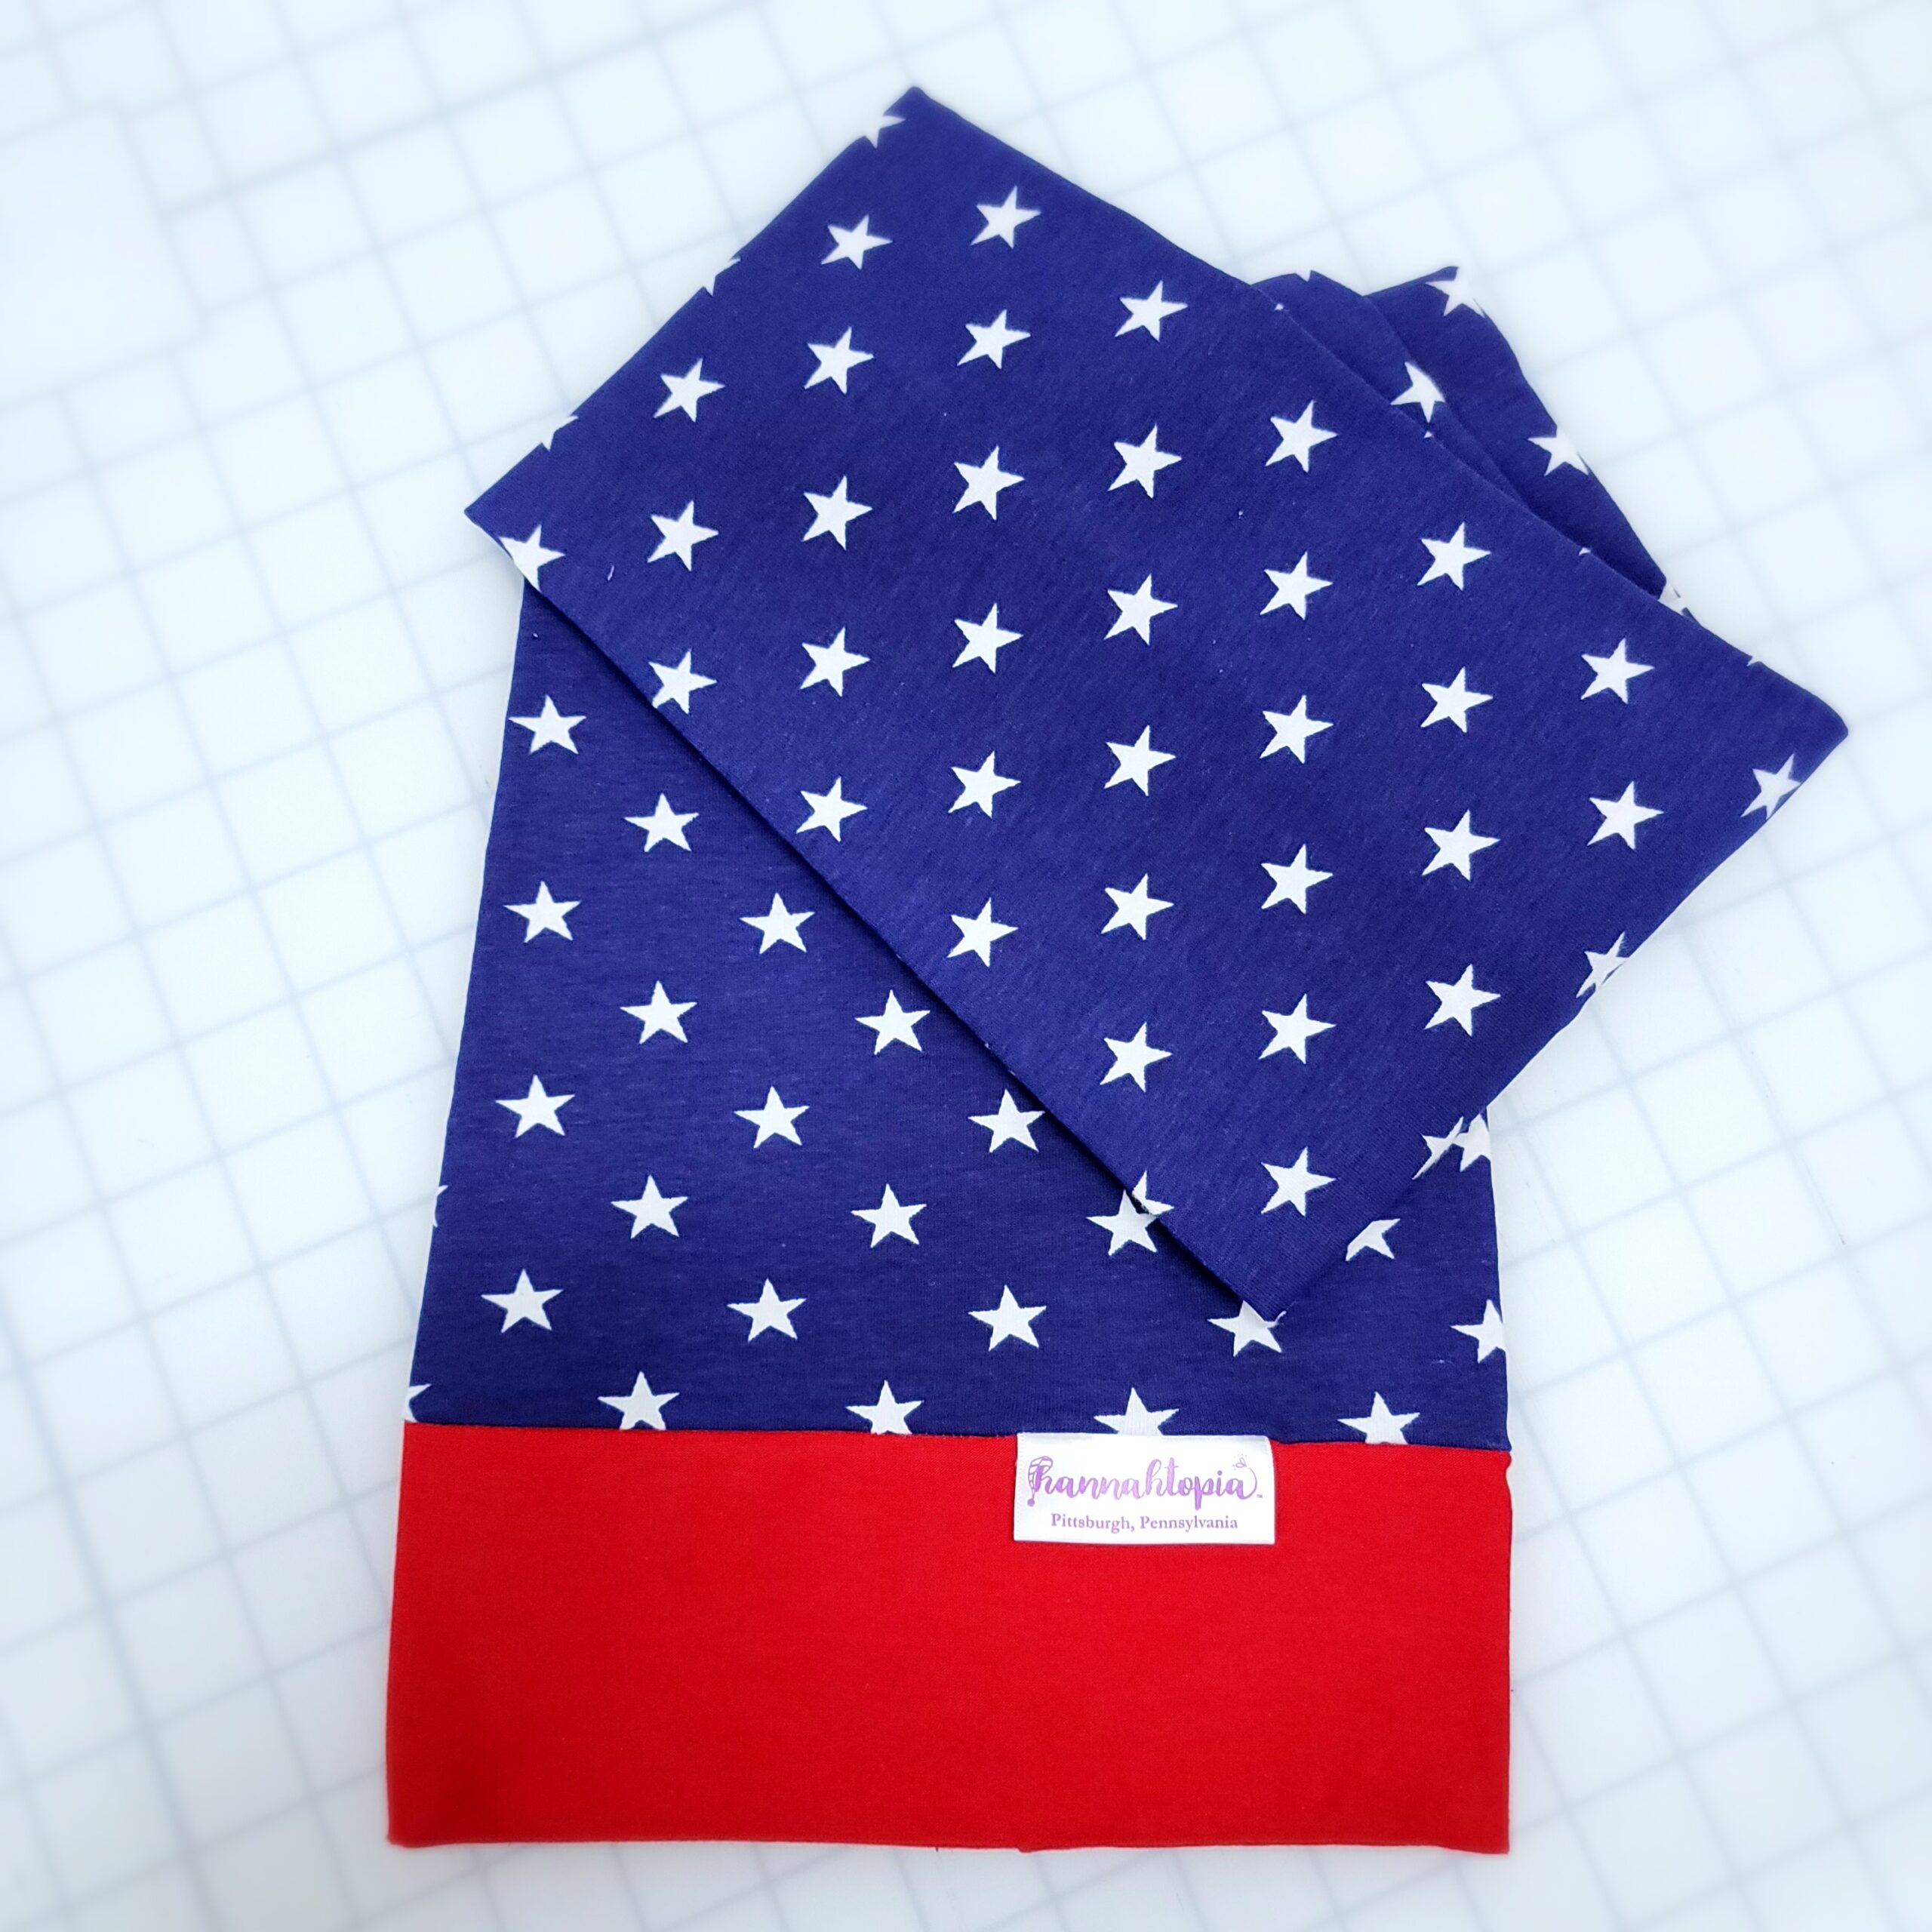 Red and Blue NillyNoggin EEG Cap with White Stars showing folded